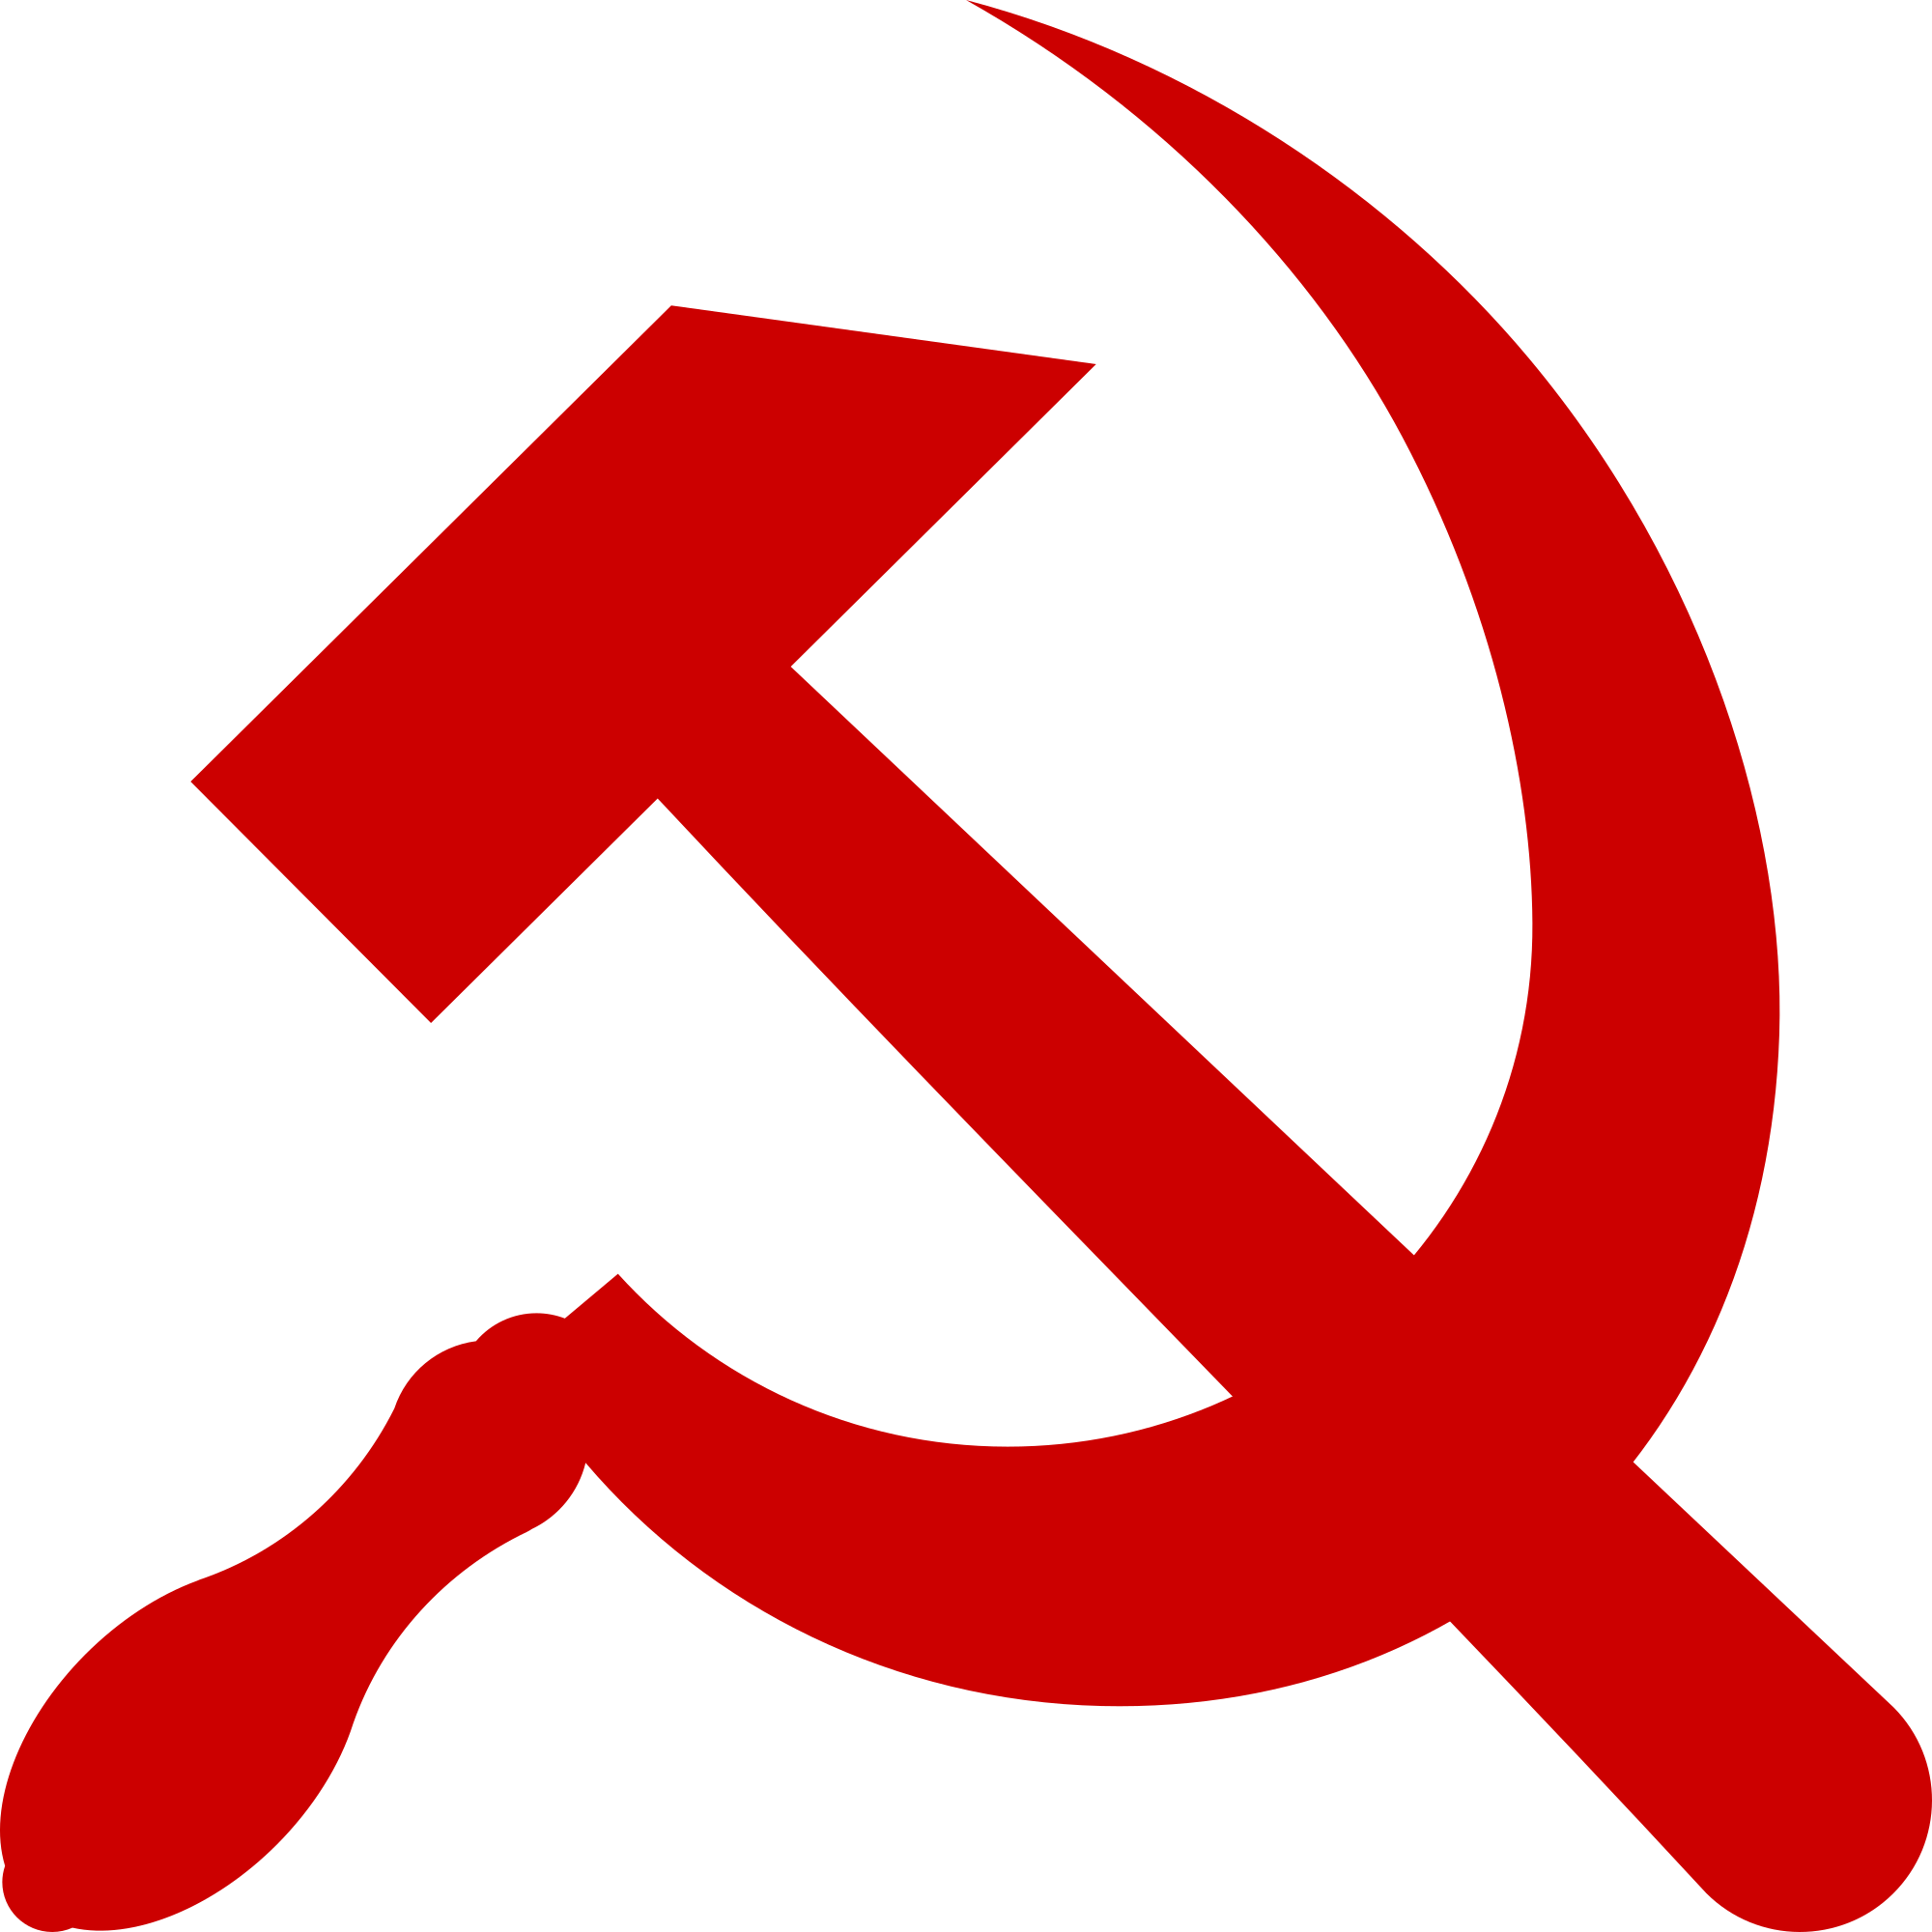 [Image: 2000px-Hammer_and_sickle_red_on_transparent.svg.png]